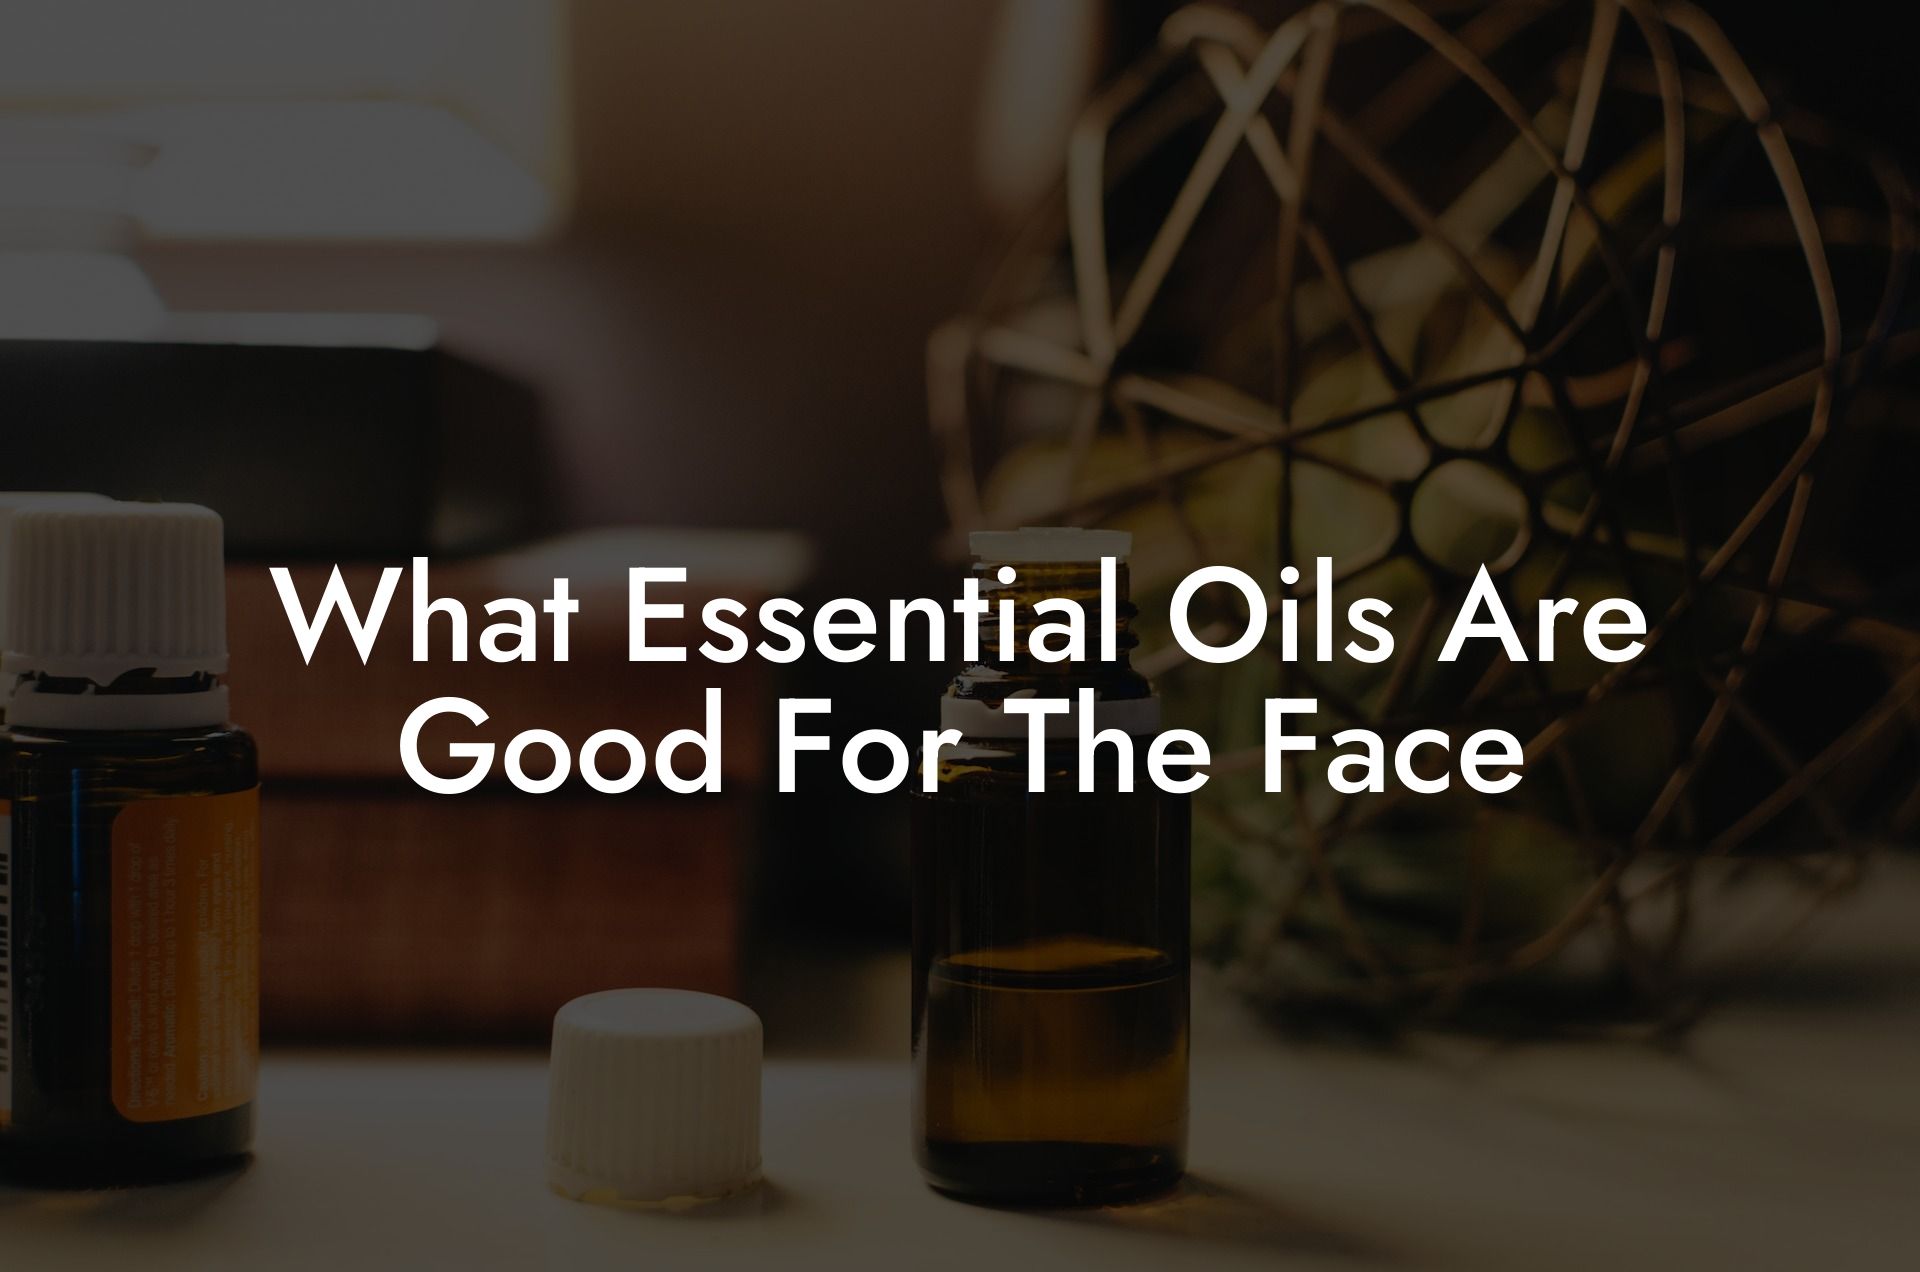 What Essential Oils Are Good For The Face